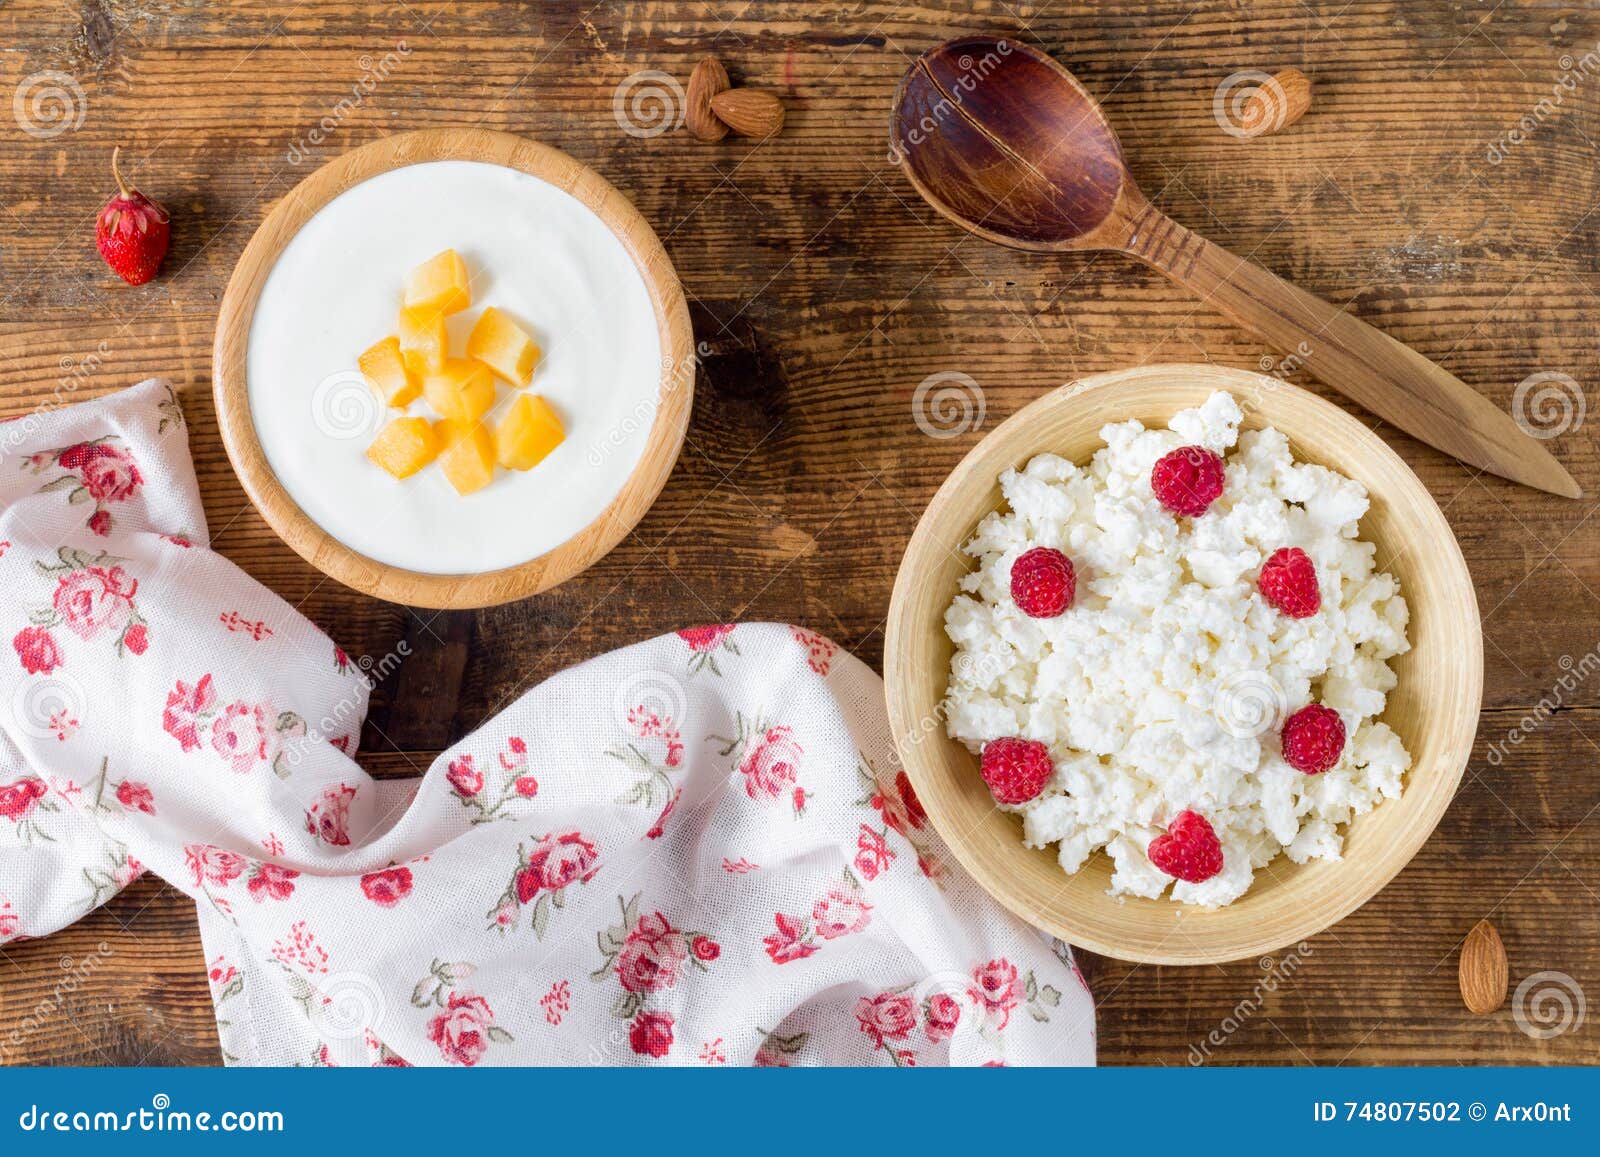 Yogurt And Cottage Cheese With Fruits Overhead View Stock Photo